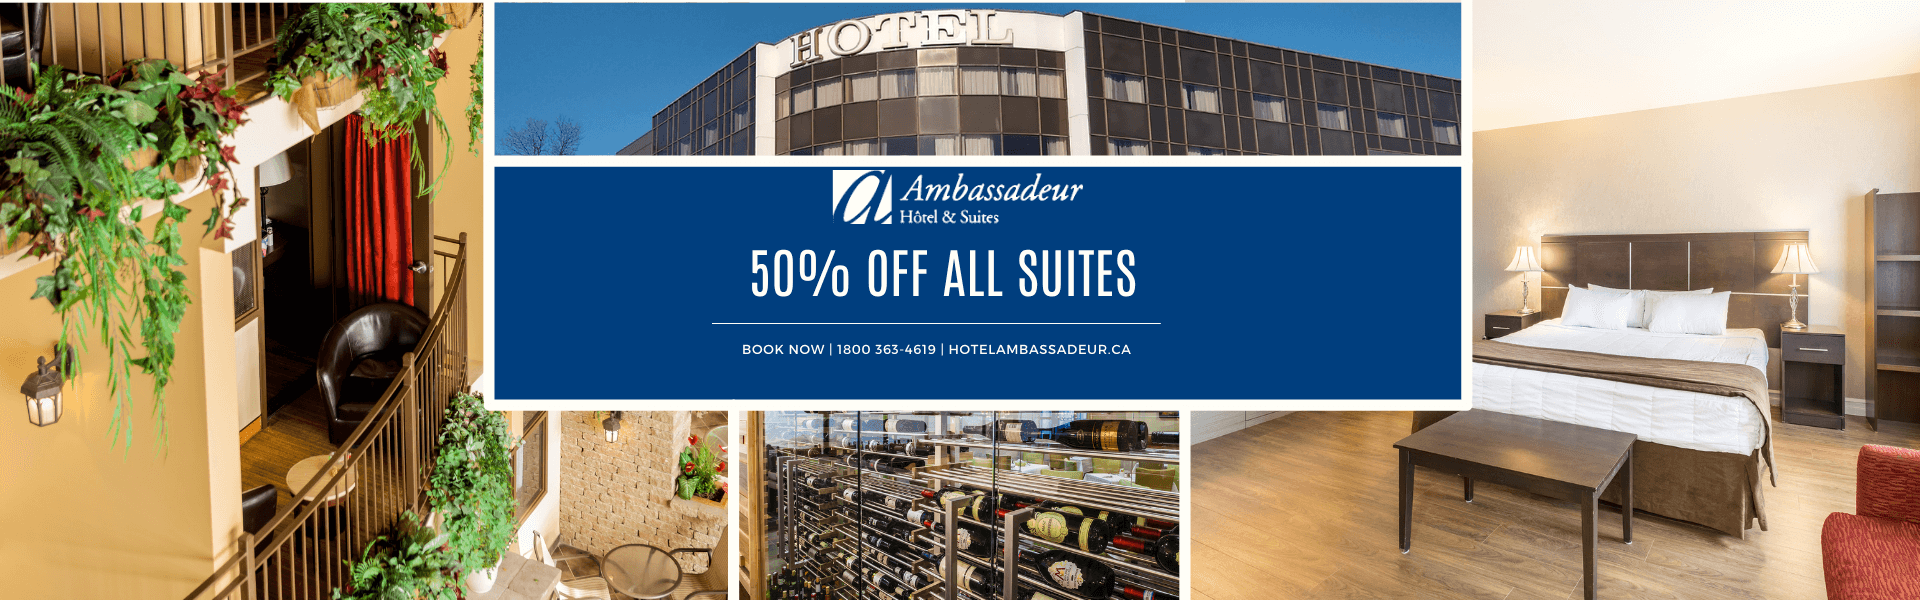 Our Suites at 50% Off